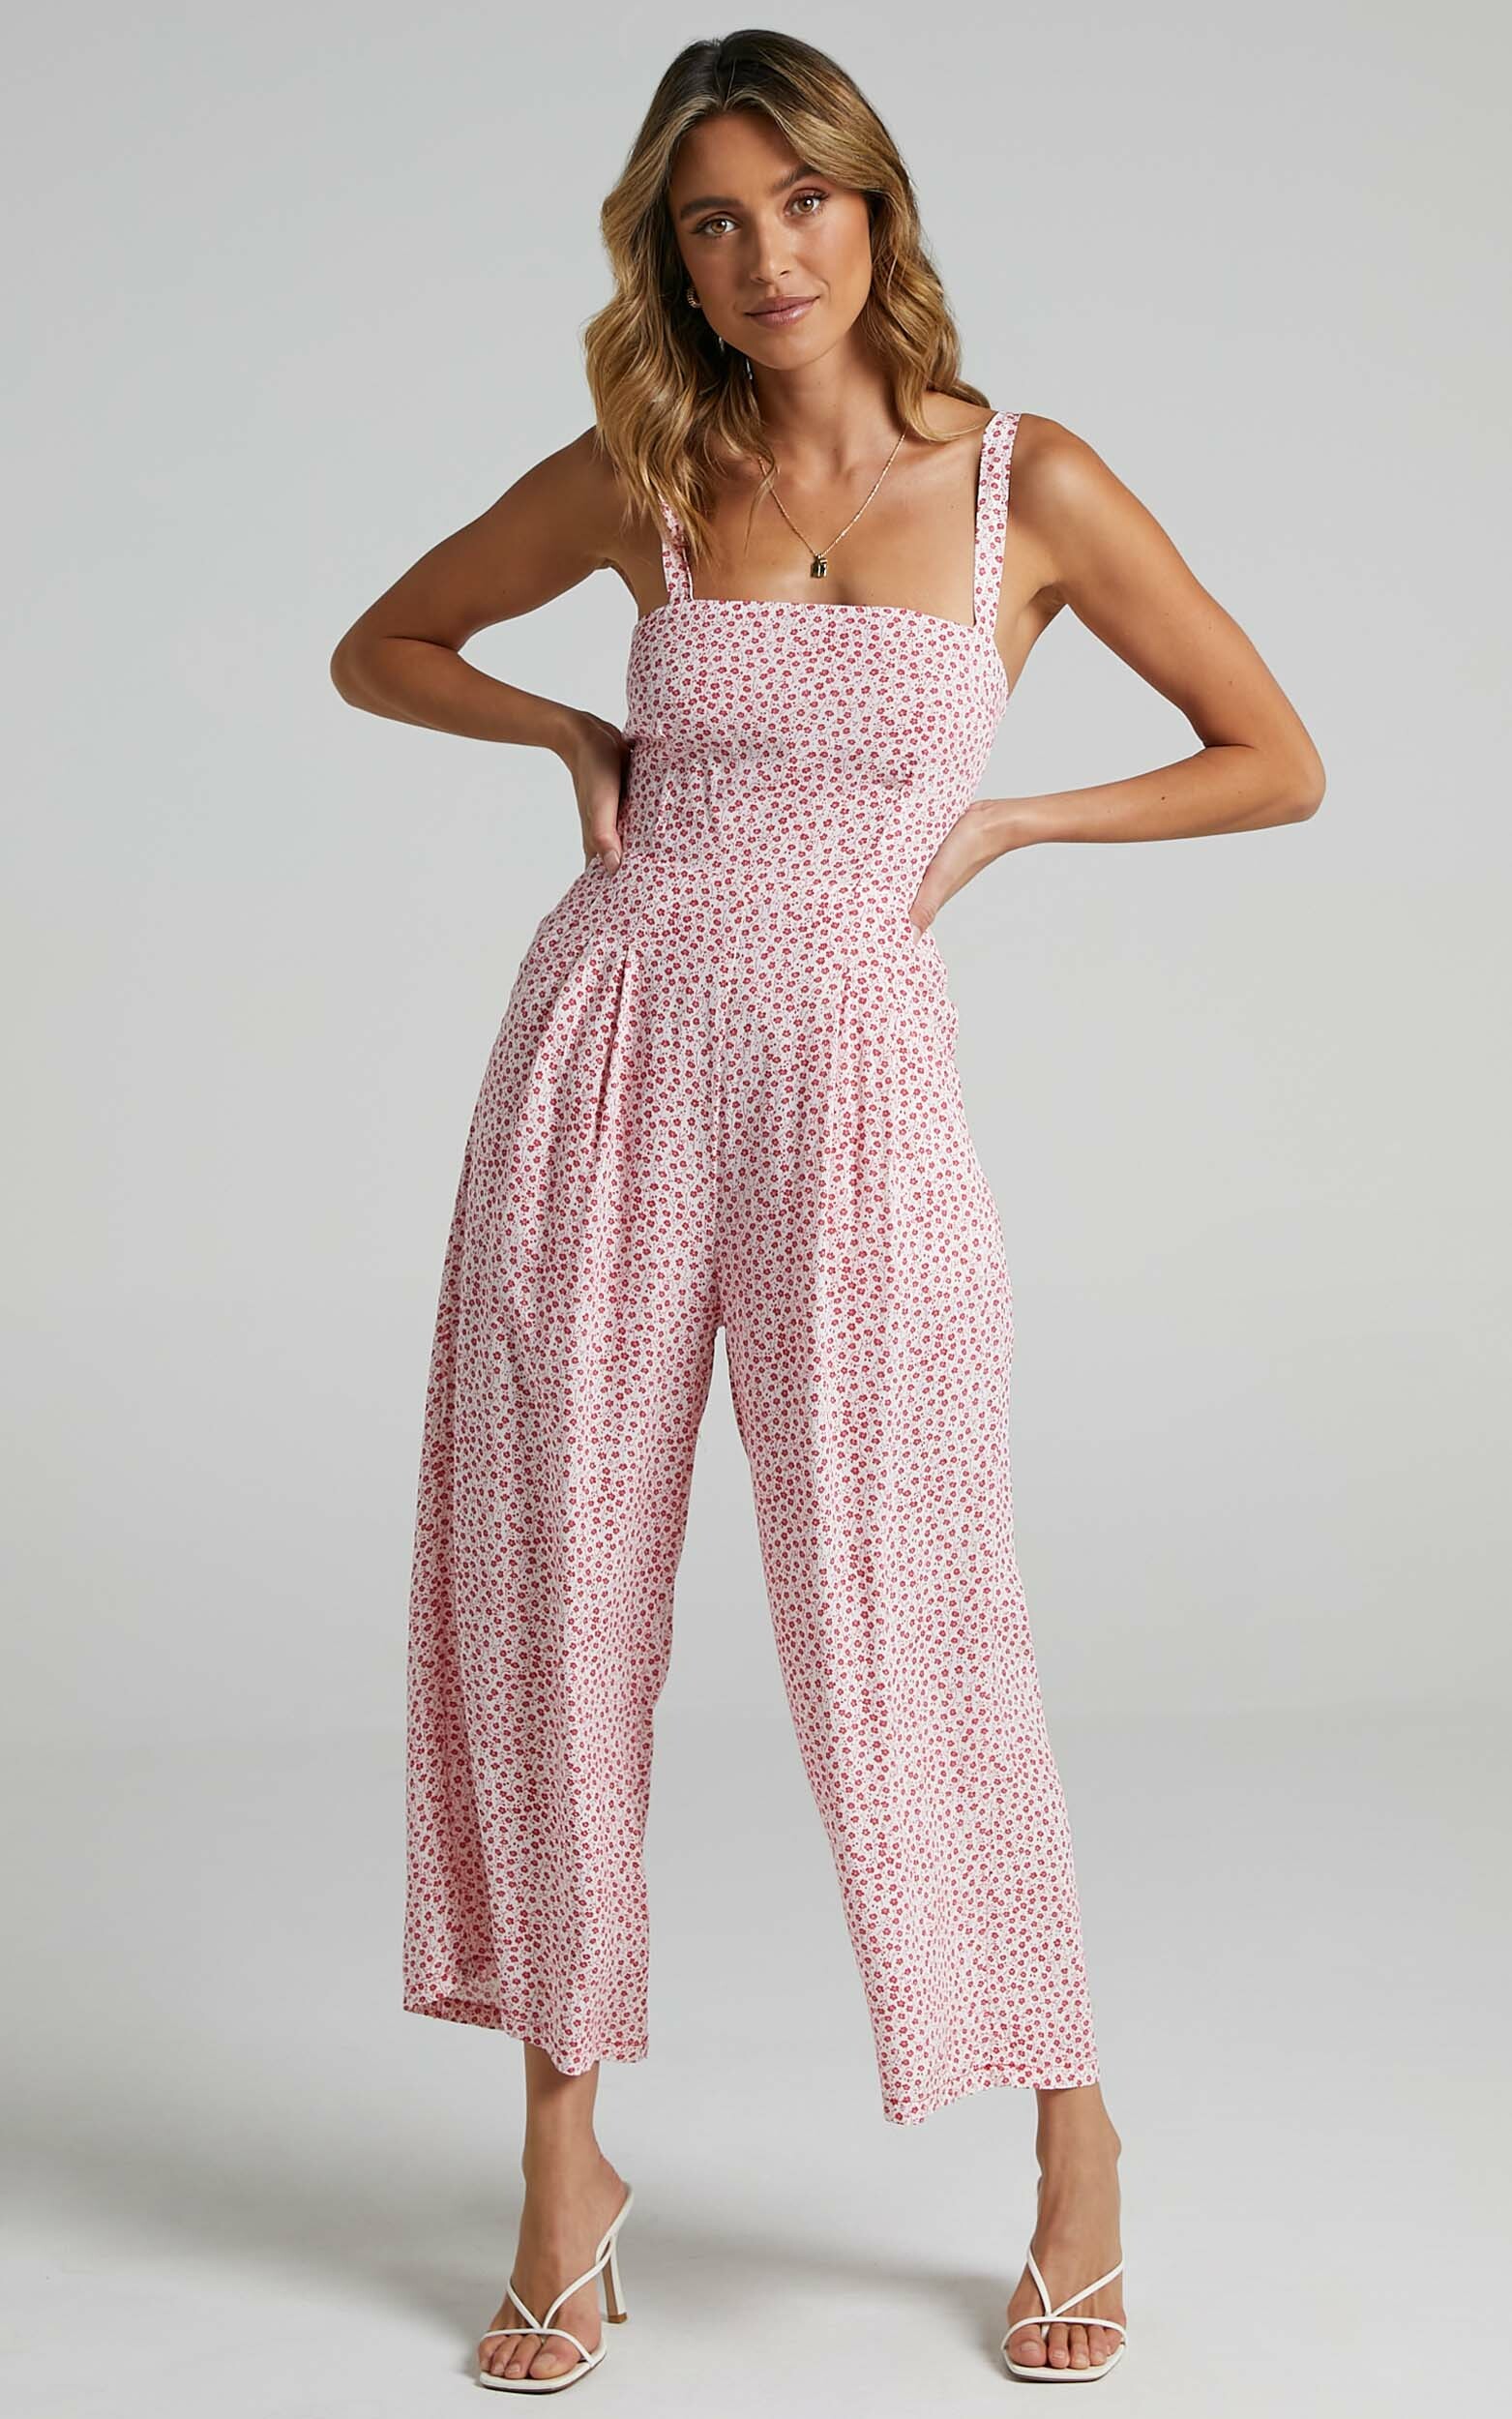 Life On The Road Jumpsuit in Red Floral - 20, RED2, hi-res image number null